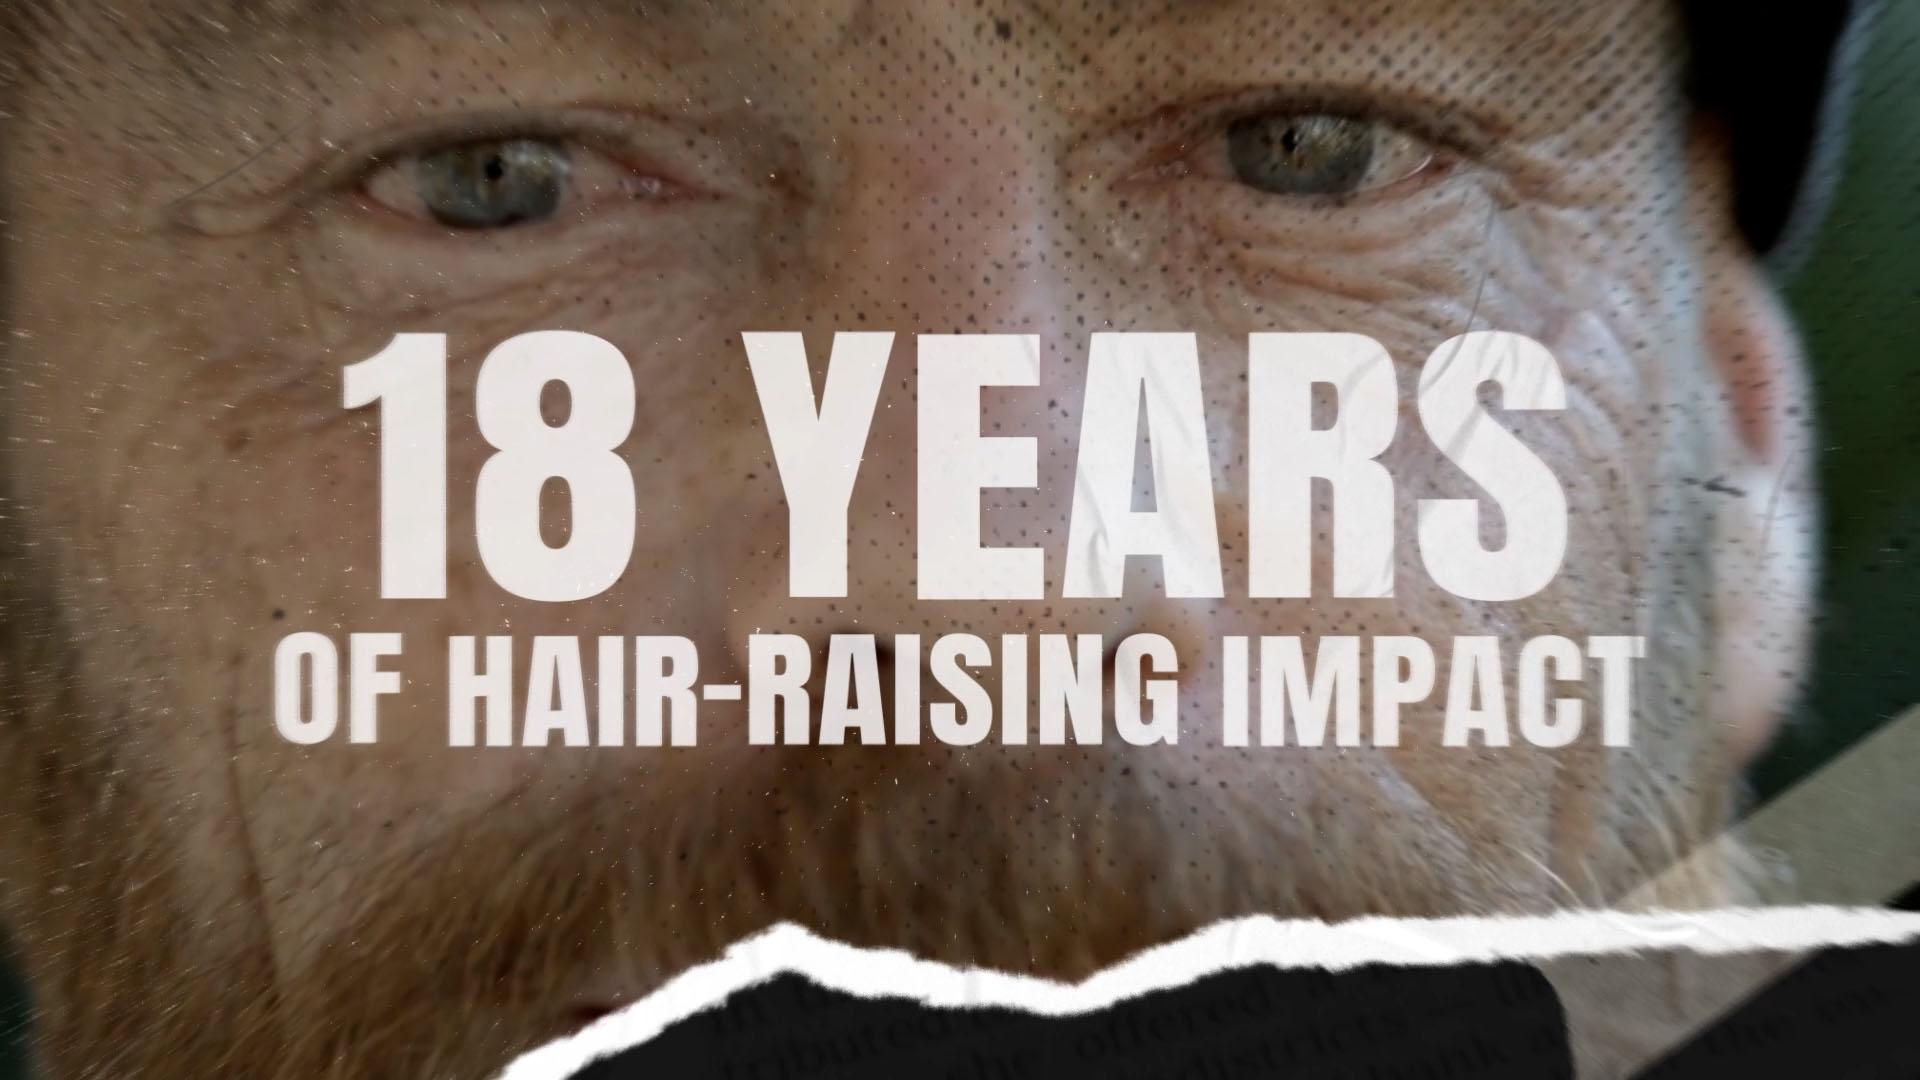 Close-up of man's eyes with visible moustache. Its text reads: "18 years of hair-raising impact"."